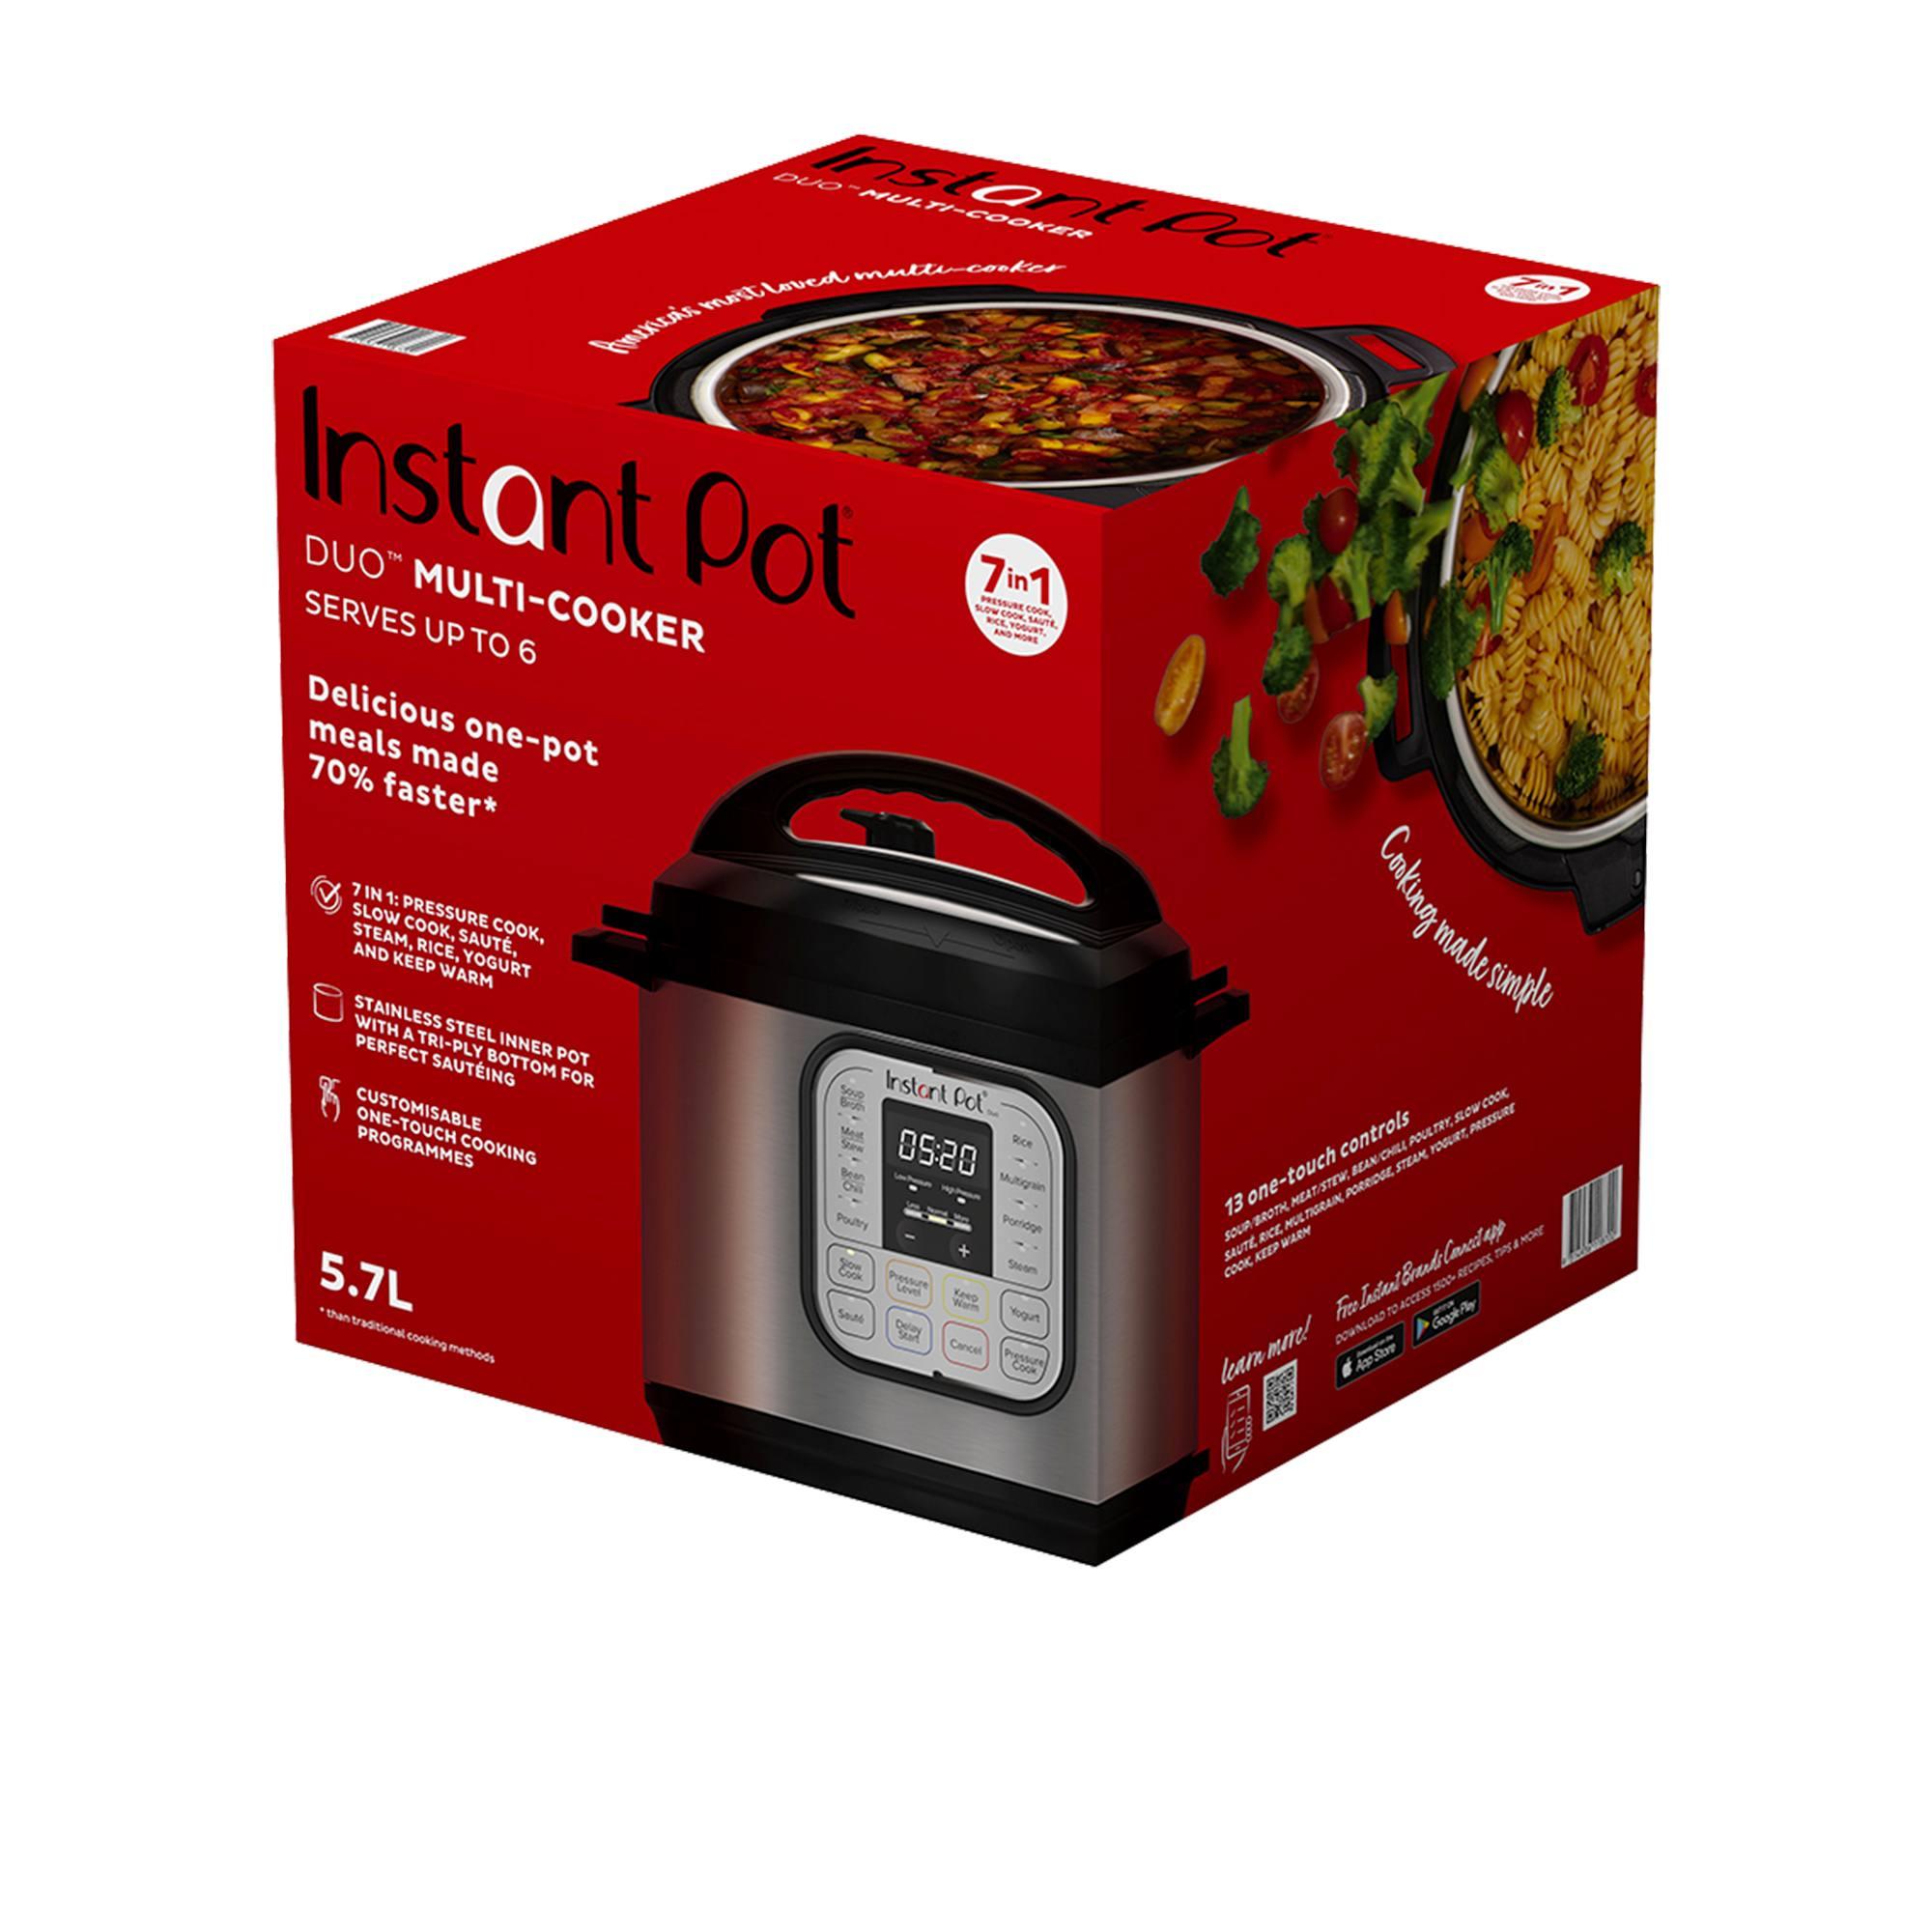 Instant Pot Duo 7 in 1 Multi Cooker 5.7L Image 5